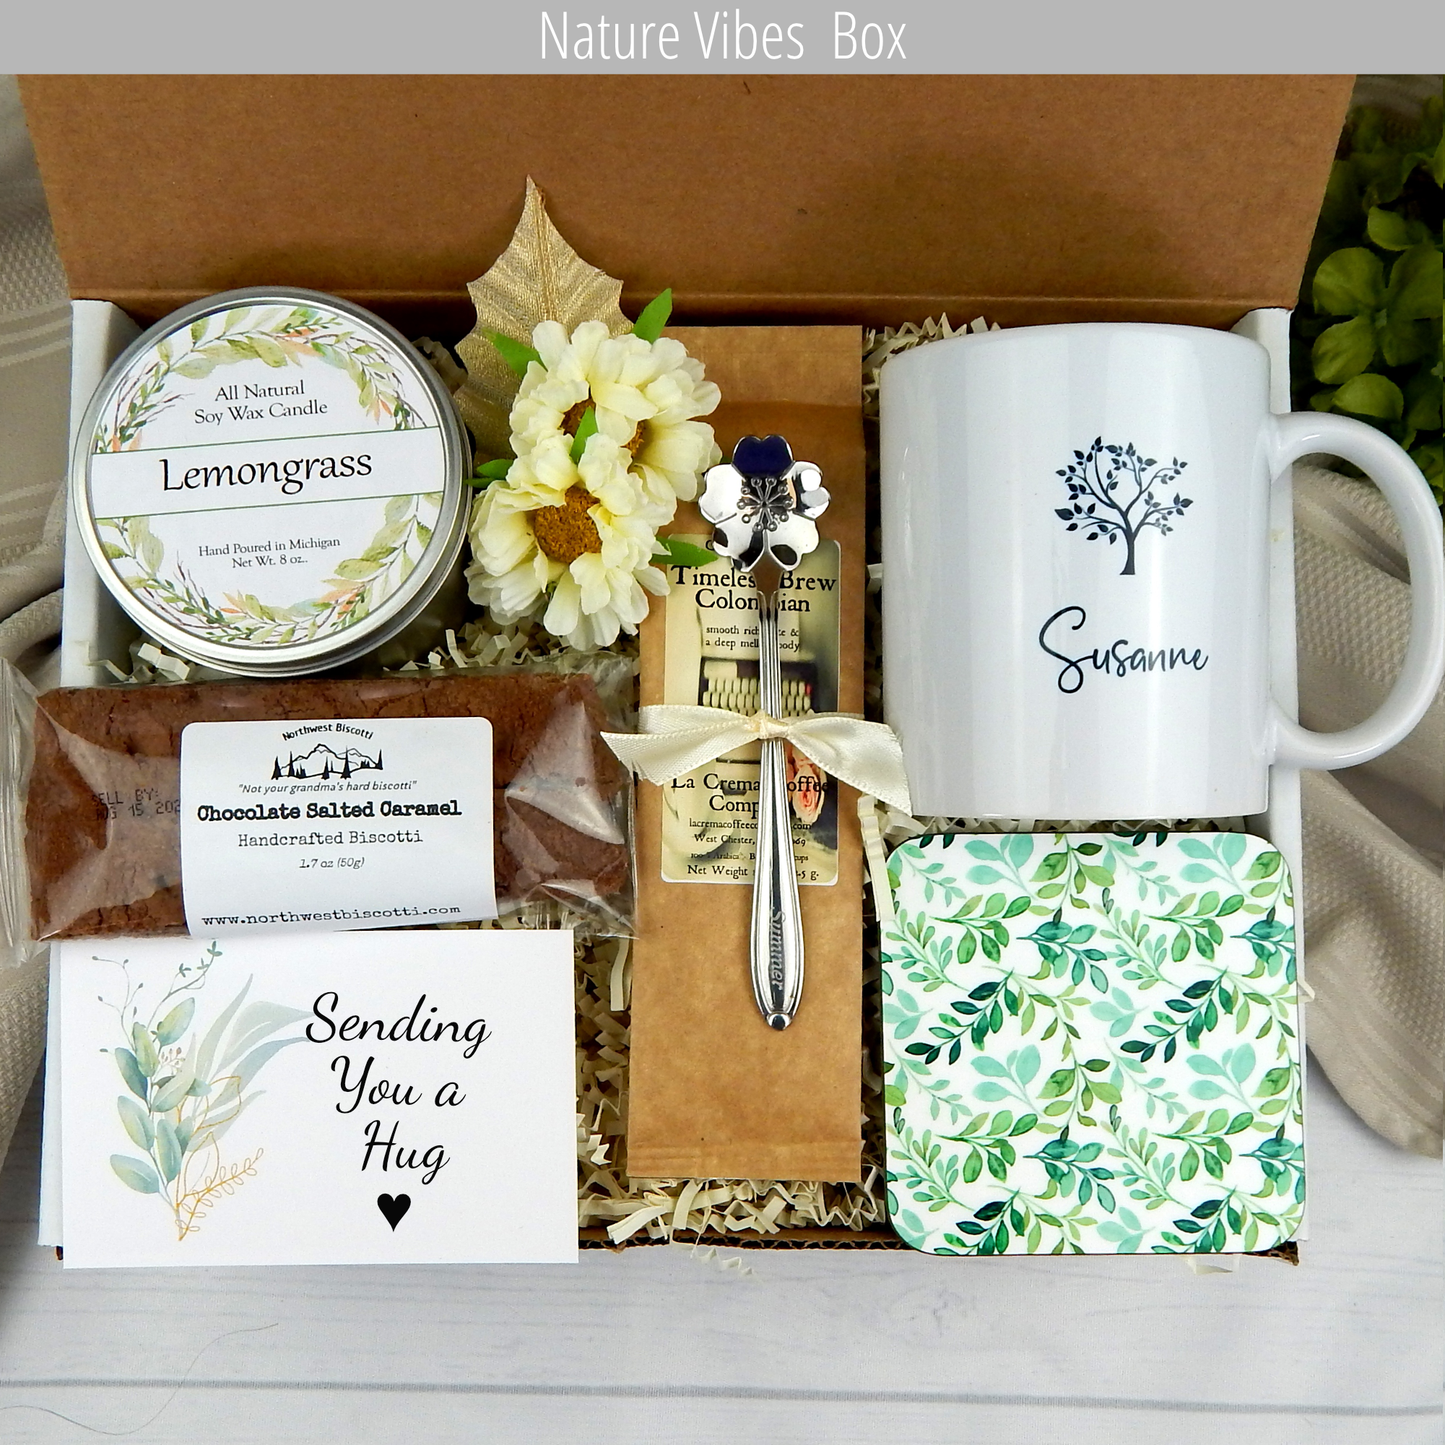 Thoughtful embrace: Custom mug, coffee, and an assortment of treats in an encouragement gift basket.